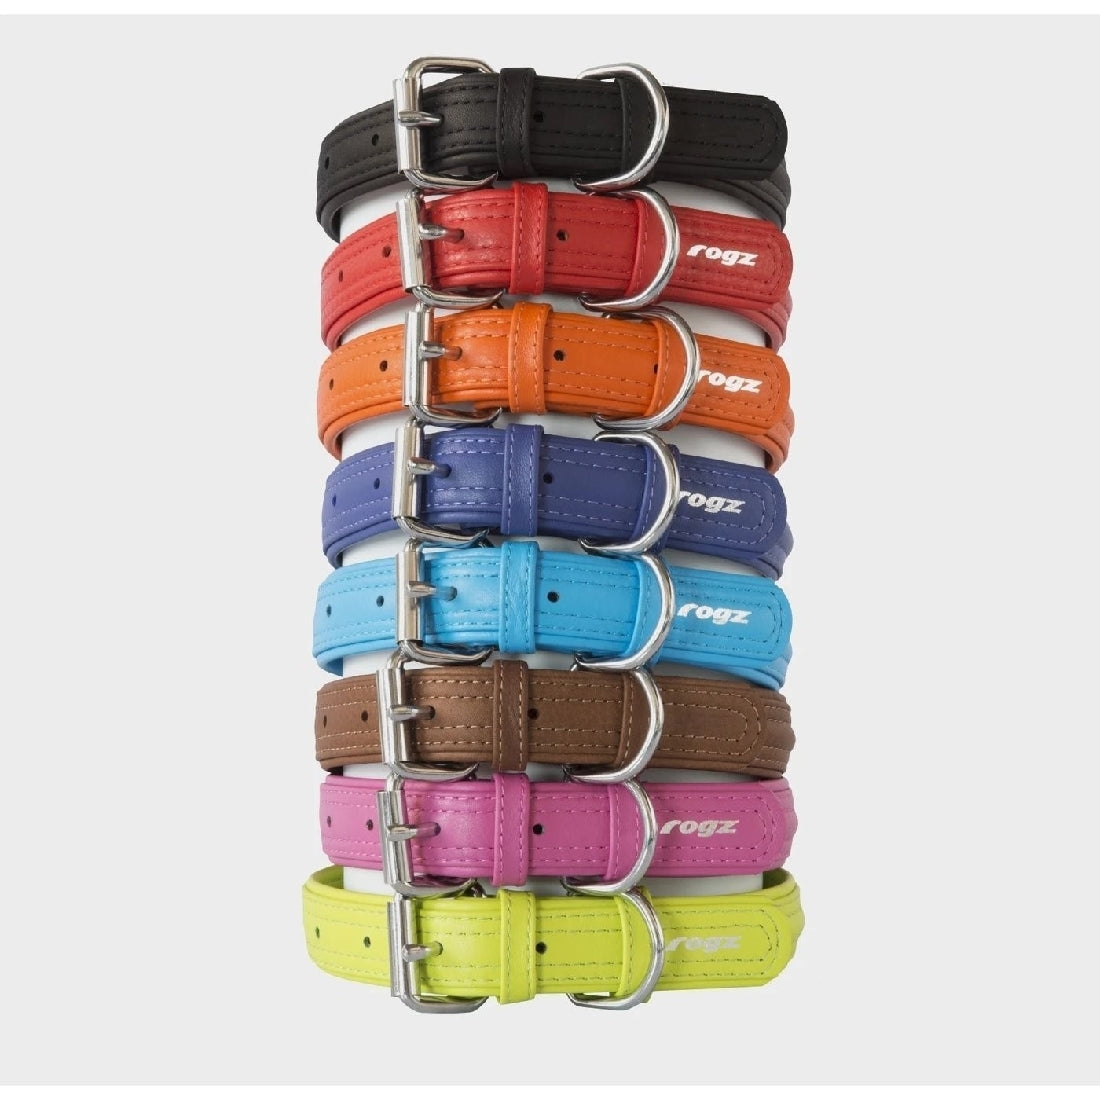 Stack of colorful Rogz dog collars on white background.